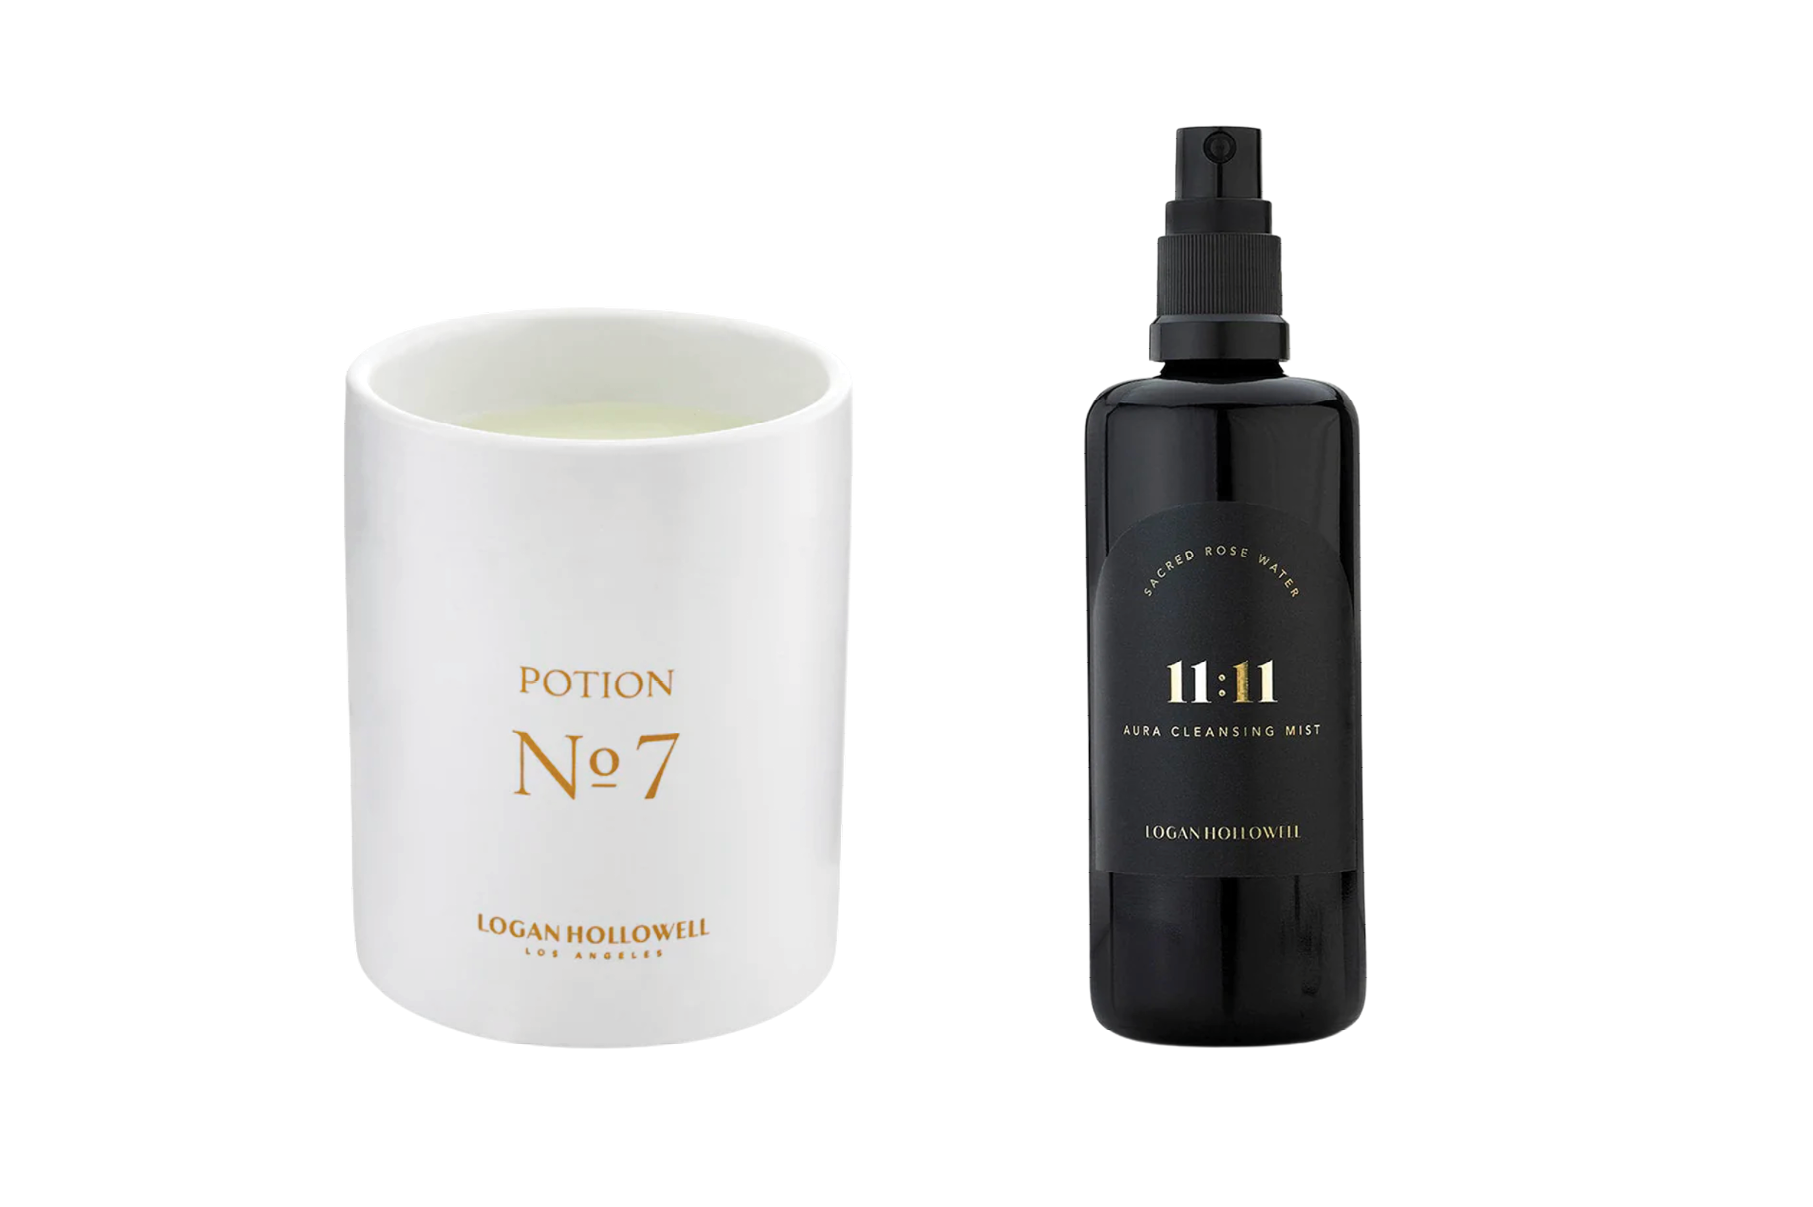 No.7 Potion Candle & Sacred Rose Water Aura Cleansing Mist product shot